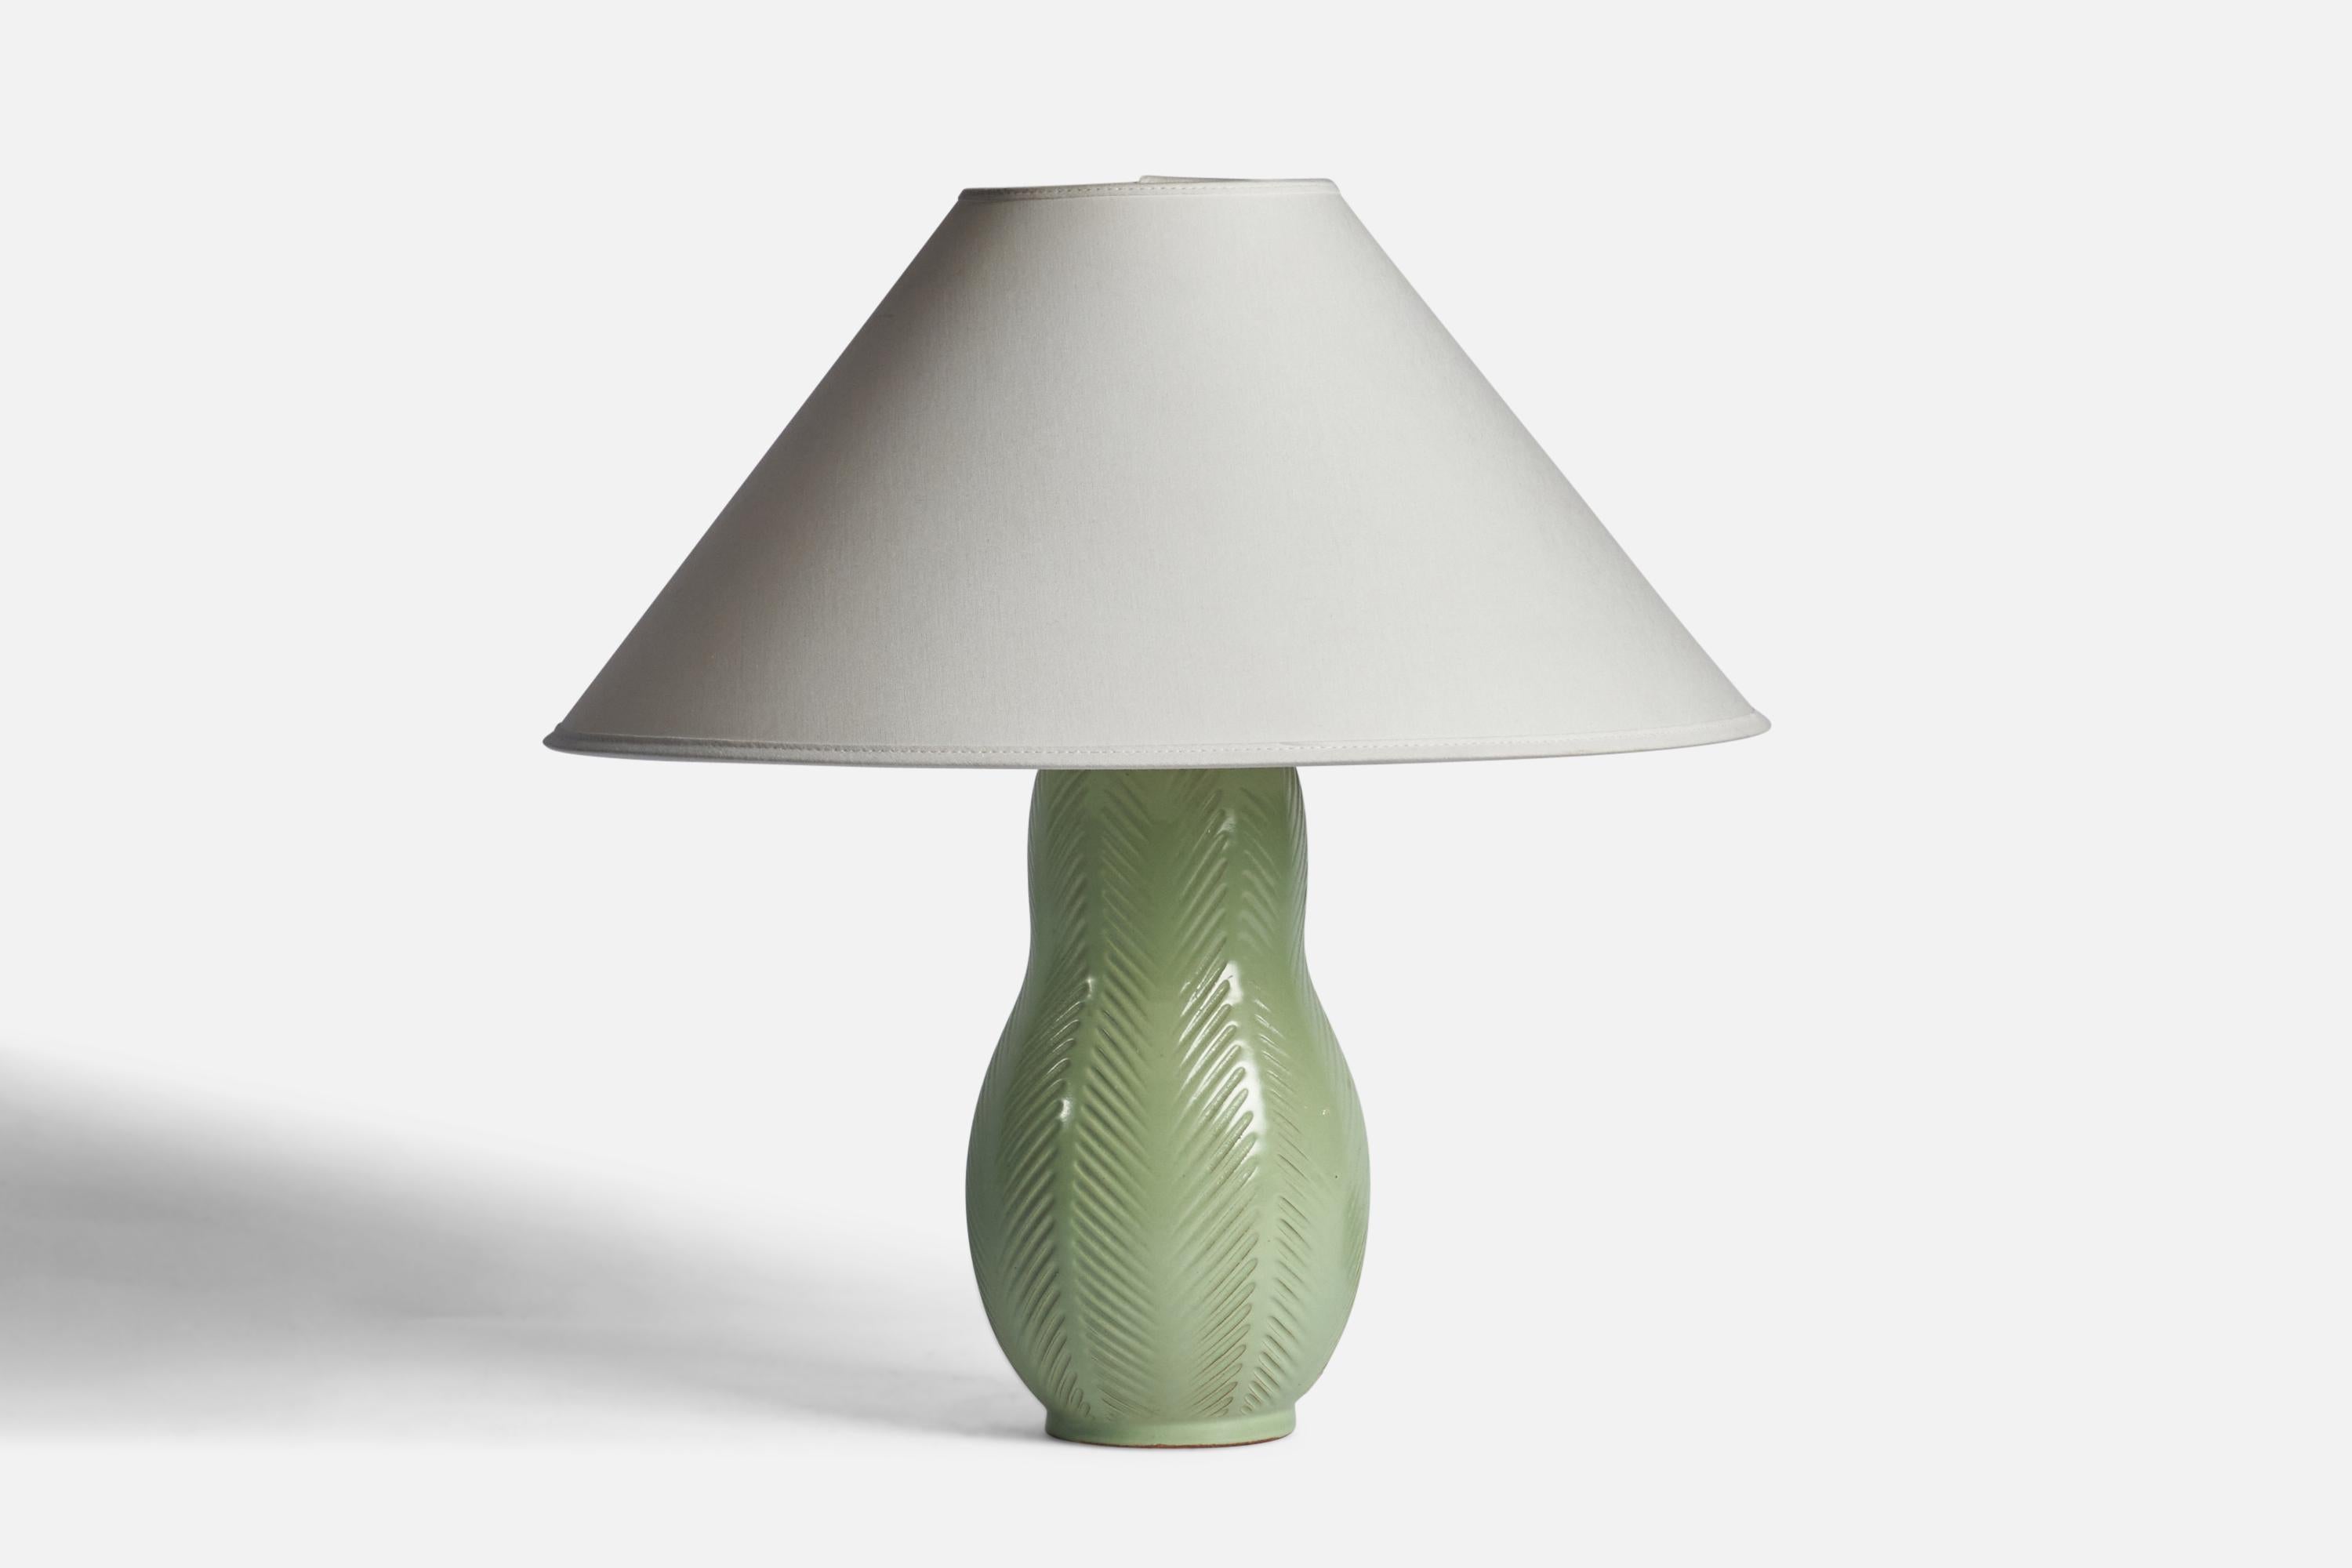 A green-glazed and incised table lamp designed by Anna-Lisa Thomson and produced by Upsala Ekeby, Sweden, 1930s.

Dimensions of Lamp (inches): 12.15 H x 5.25” Diameter
Dimensions of Shade (inches): 4.5” Top Diameter x 16” Bottom Diameter x 7.25”